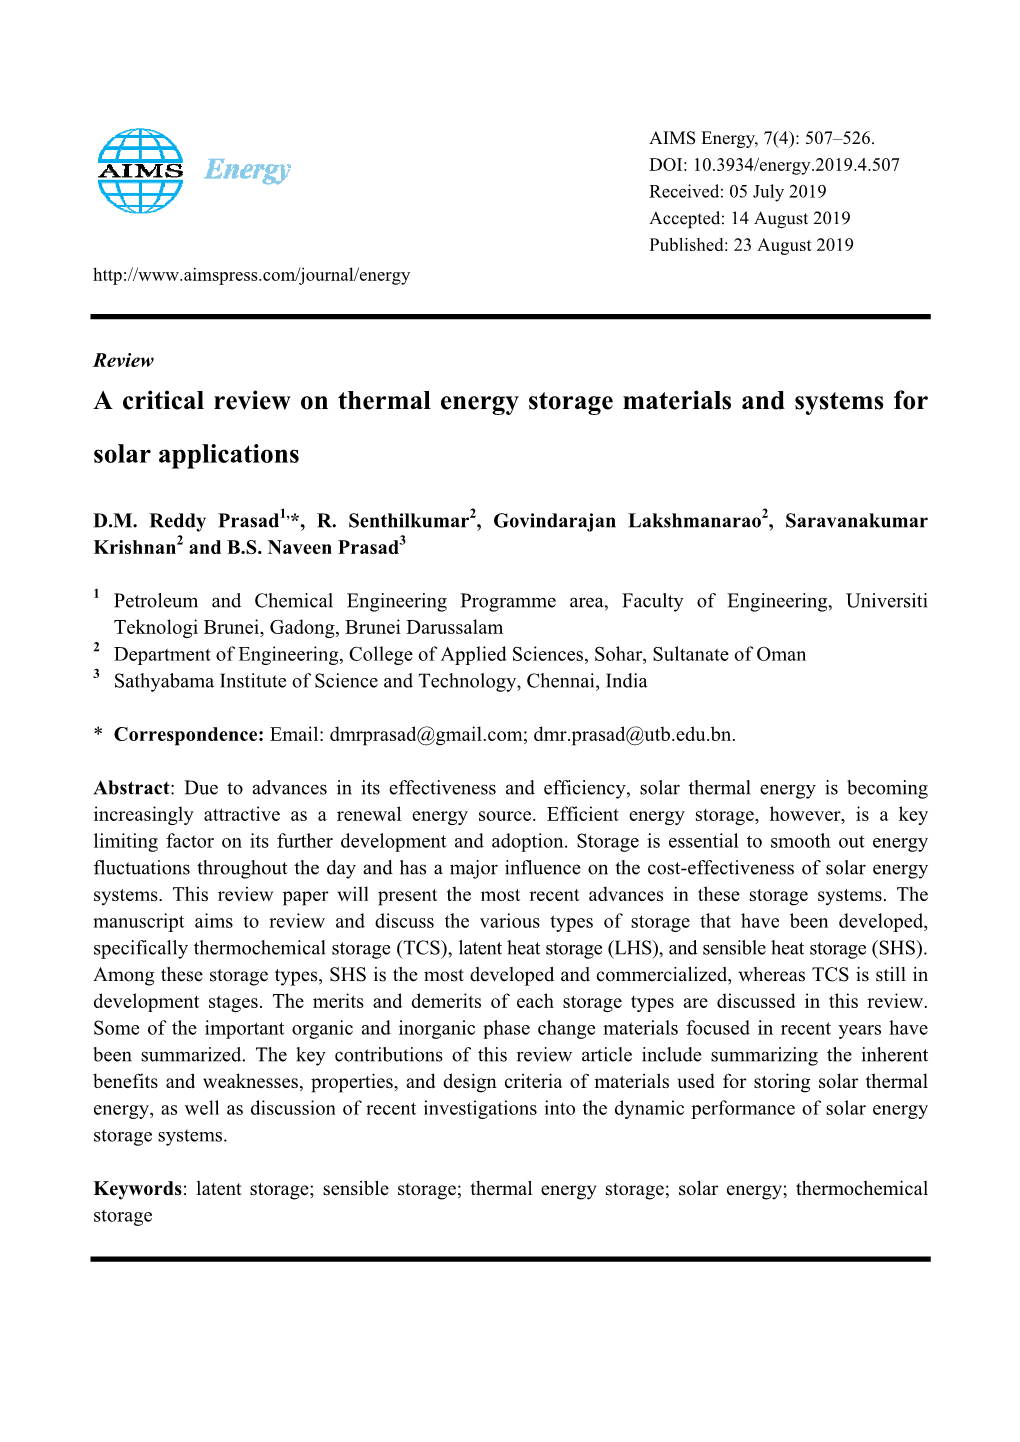 A Critical Review on Thermal Energy Storage Materials and Systems for Solar Applications